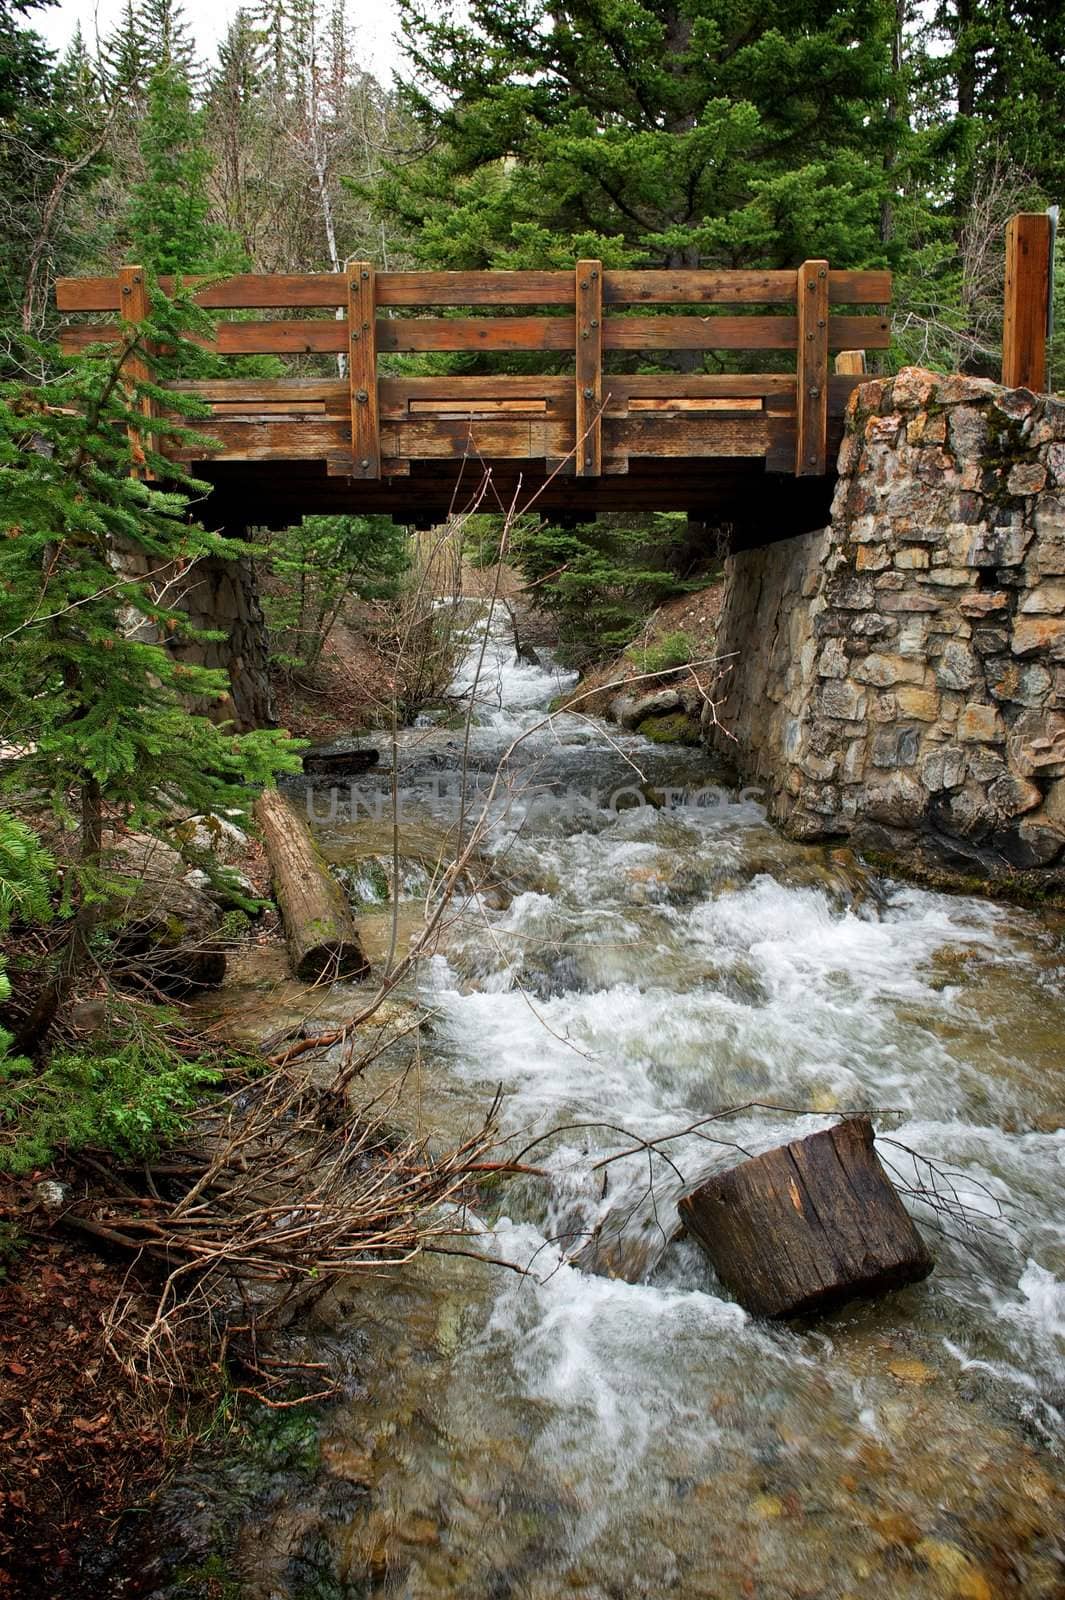 A weathered and worn wooden bridge stretches between two stone walls with a running stream